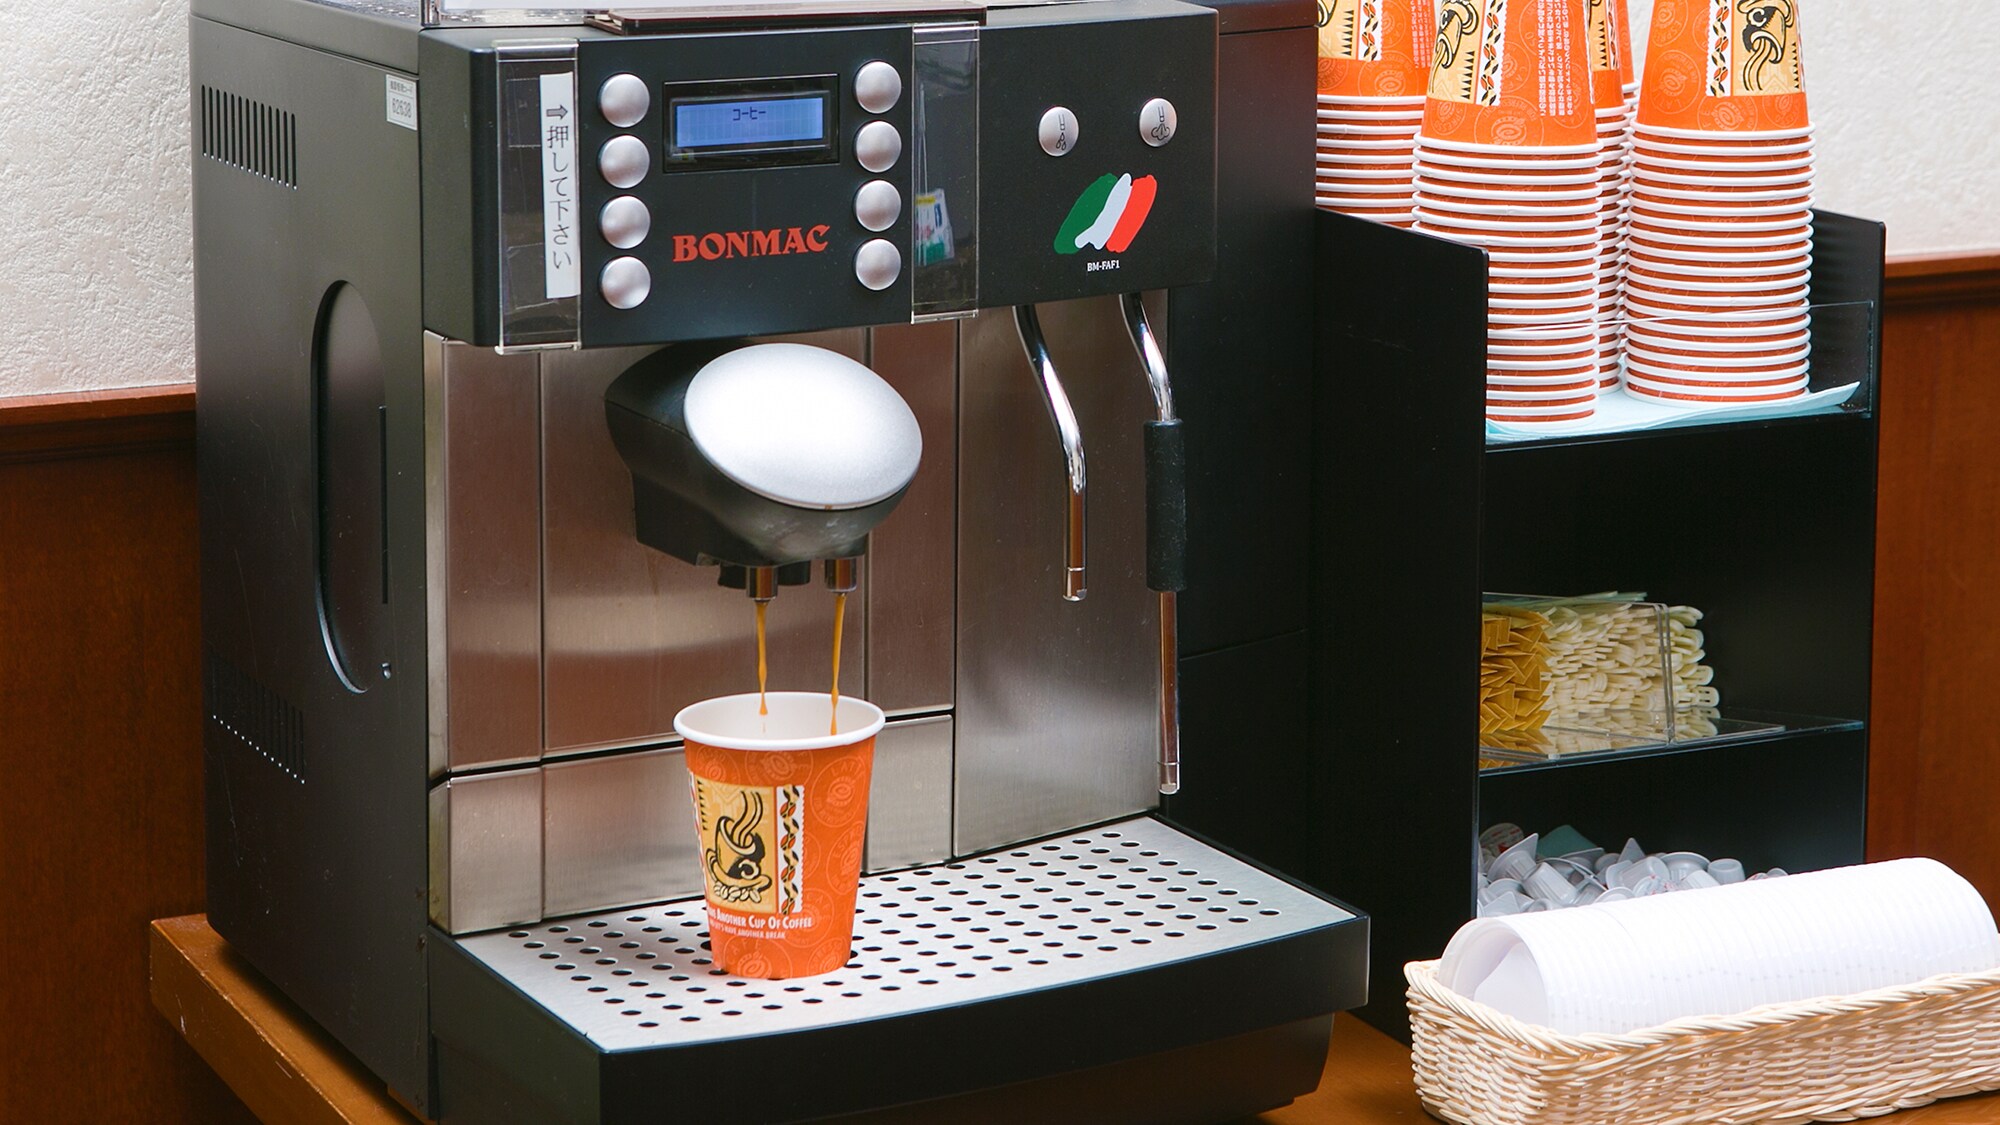 [Free coffee] Free coffee service is available in the lobby. Feel free to use it ♪